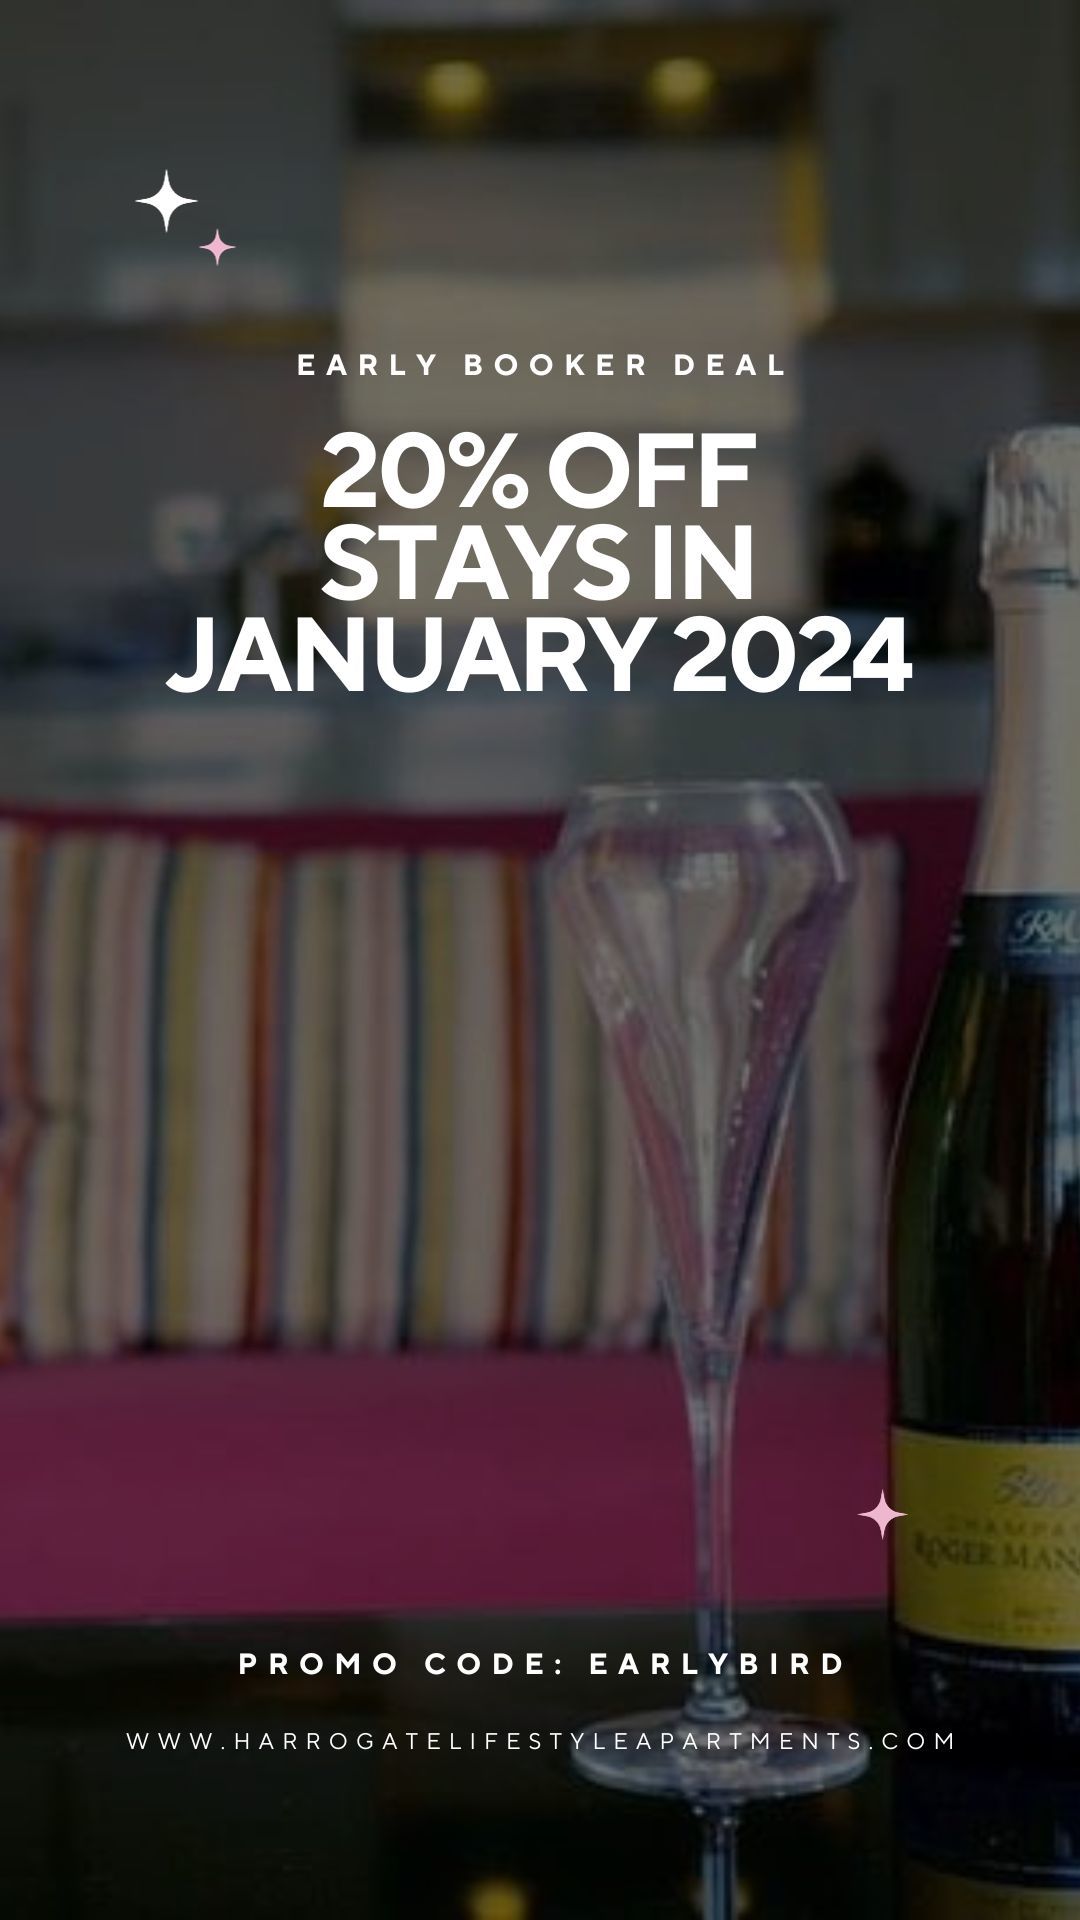 20% off stays in January 2024 promo code harrogate lifestyle apartments